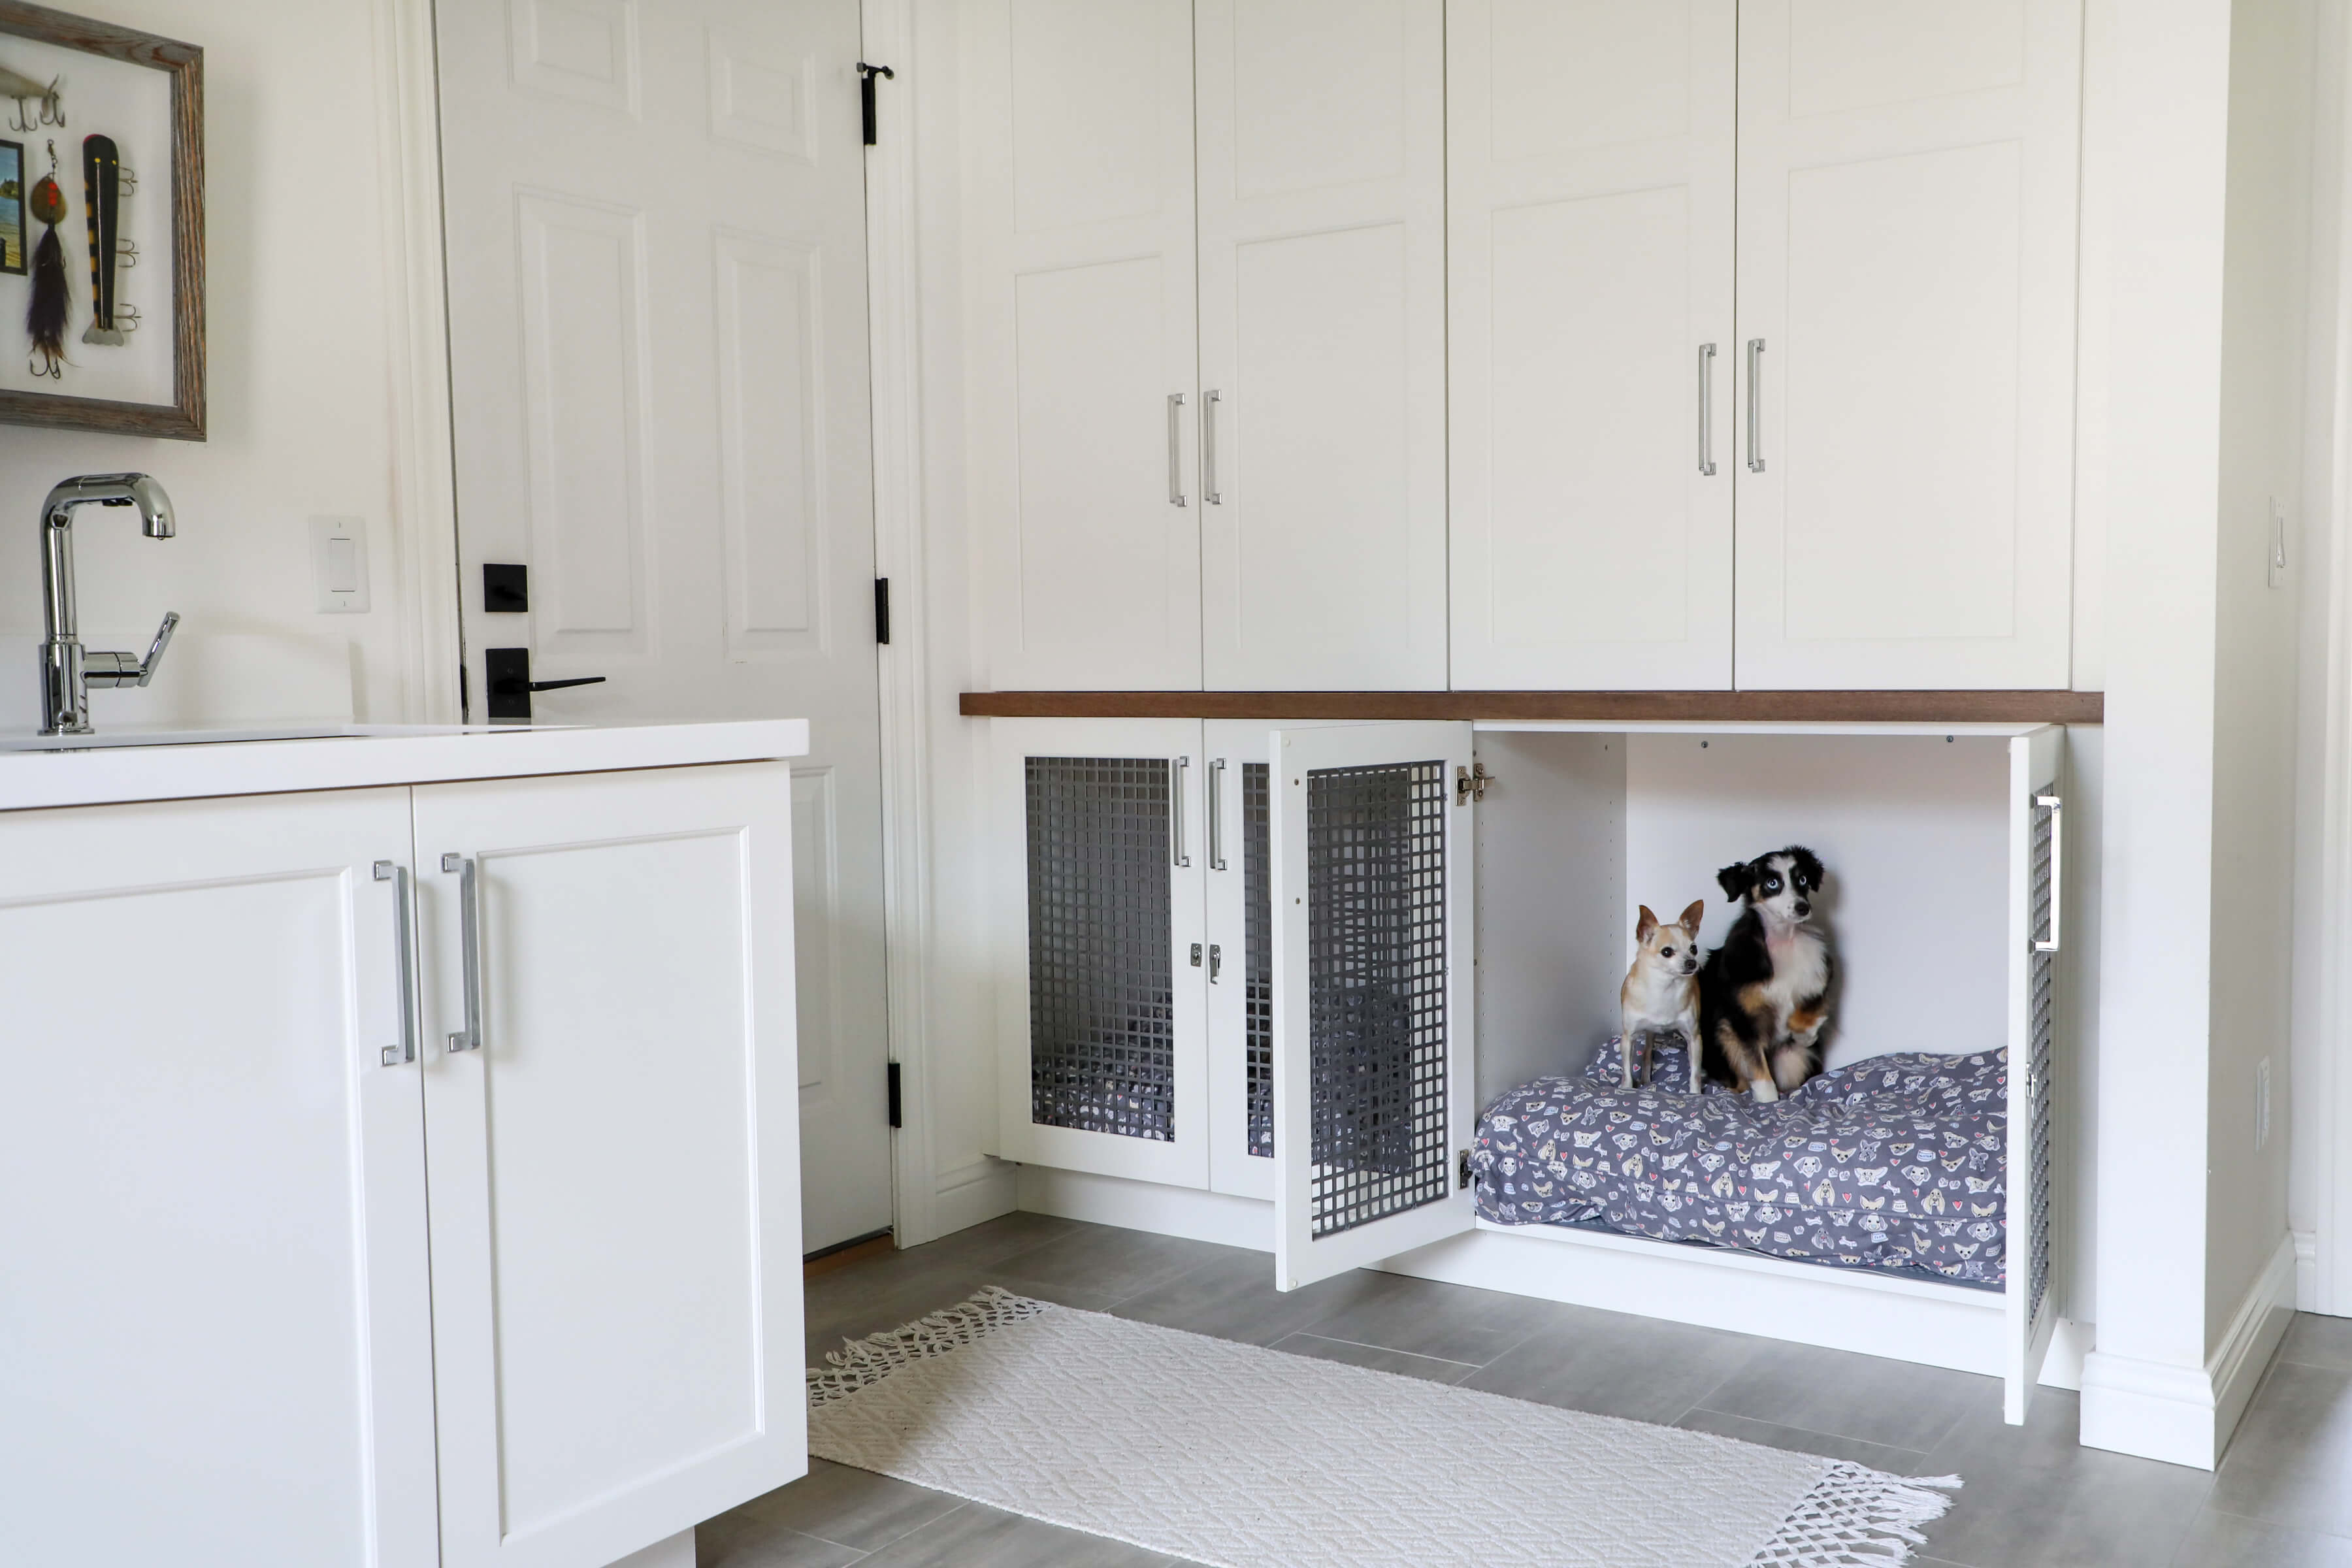 A laundry room with cabinets designed for dog beds with kennel like doors featuring a metal wire mesh cabinet insert.